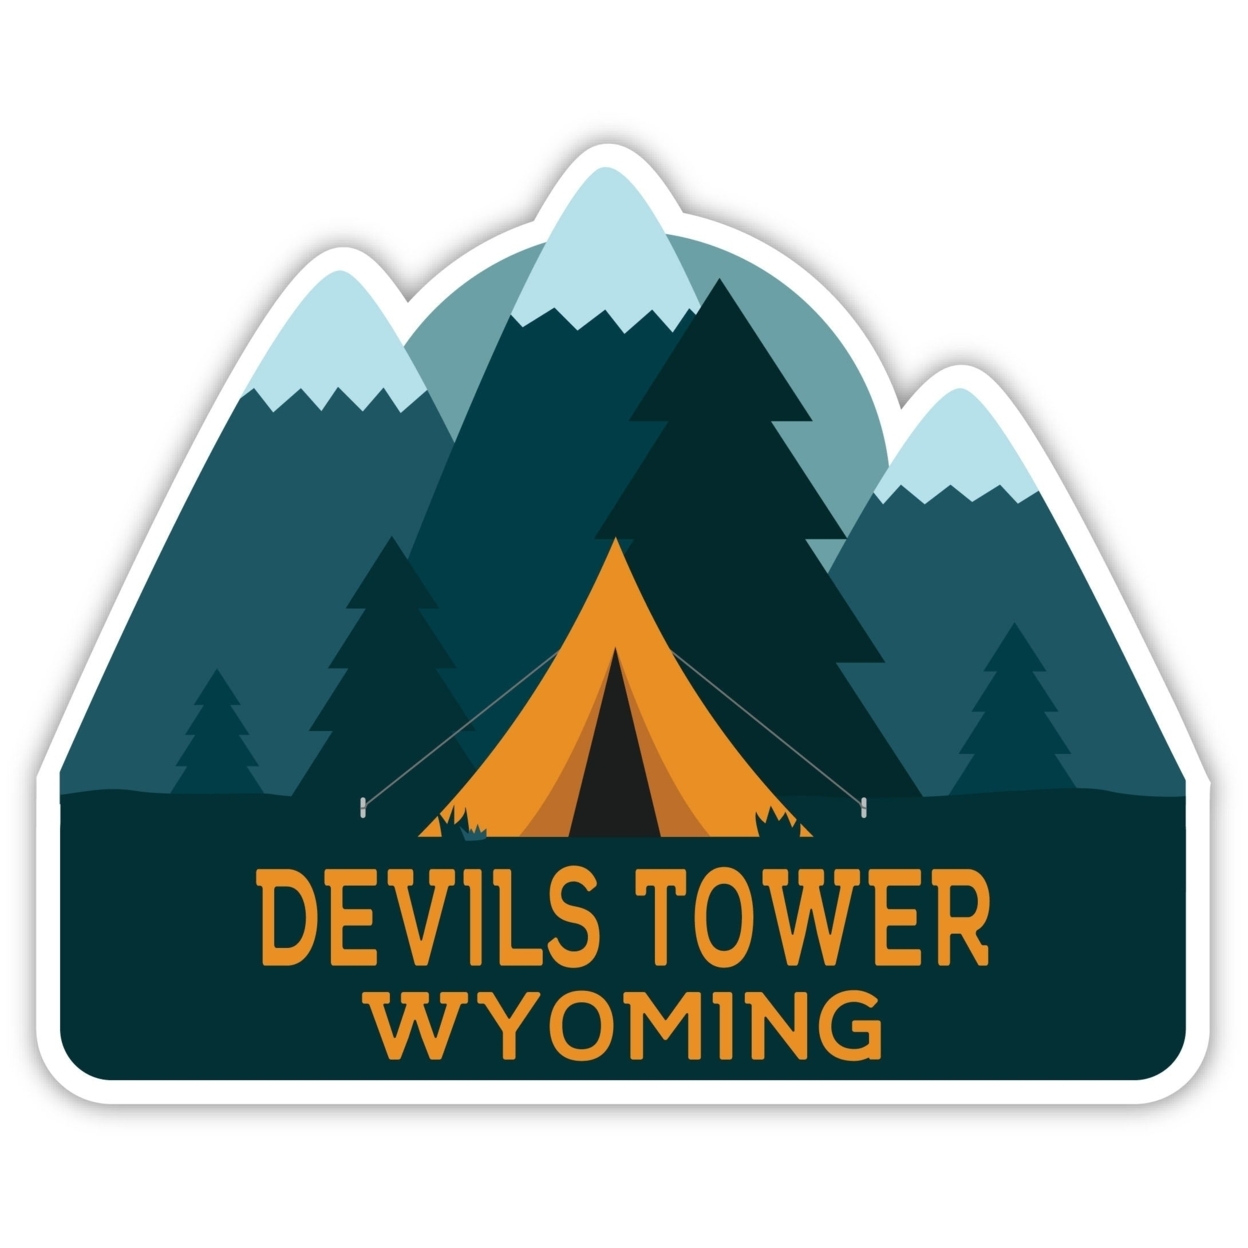 Devils Tower Wyoming Souvenir Decorative Stickers (Choose Theme And Size) - Single Unit, 6-Inch, Bear